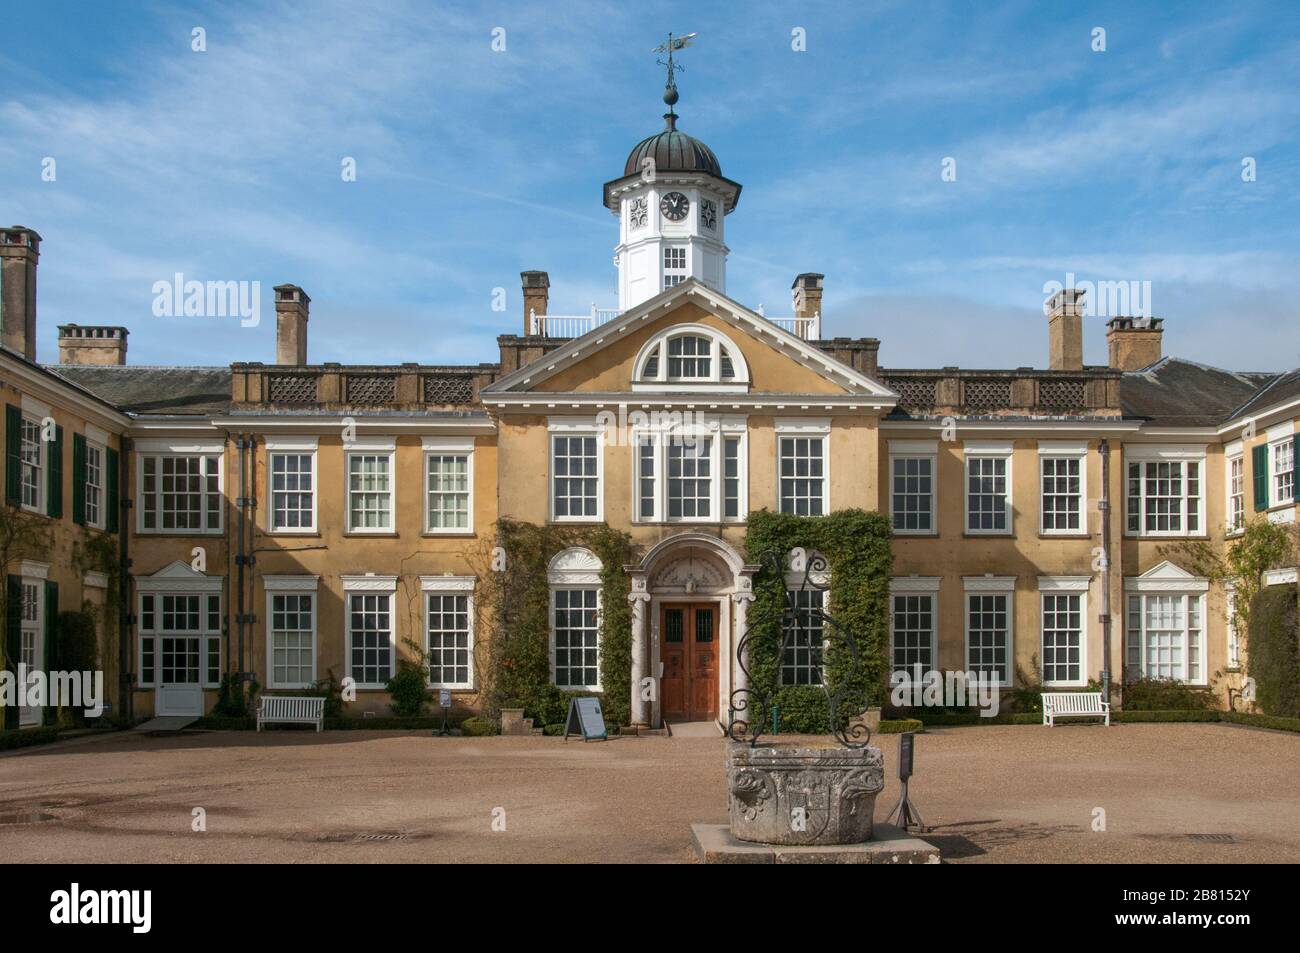 East Front of Polesden Lacey, an Edwardian country house in Bookham, Surrey, England Stock Photo